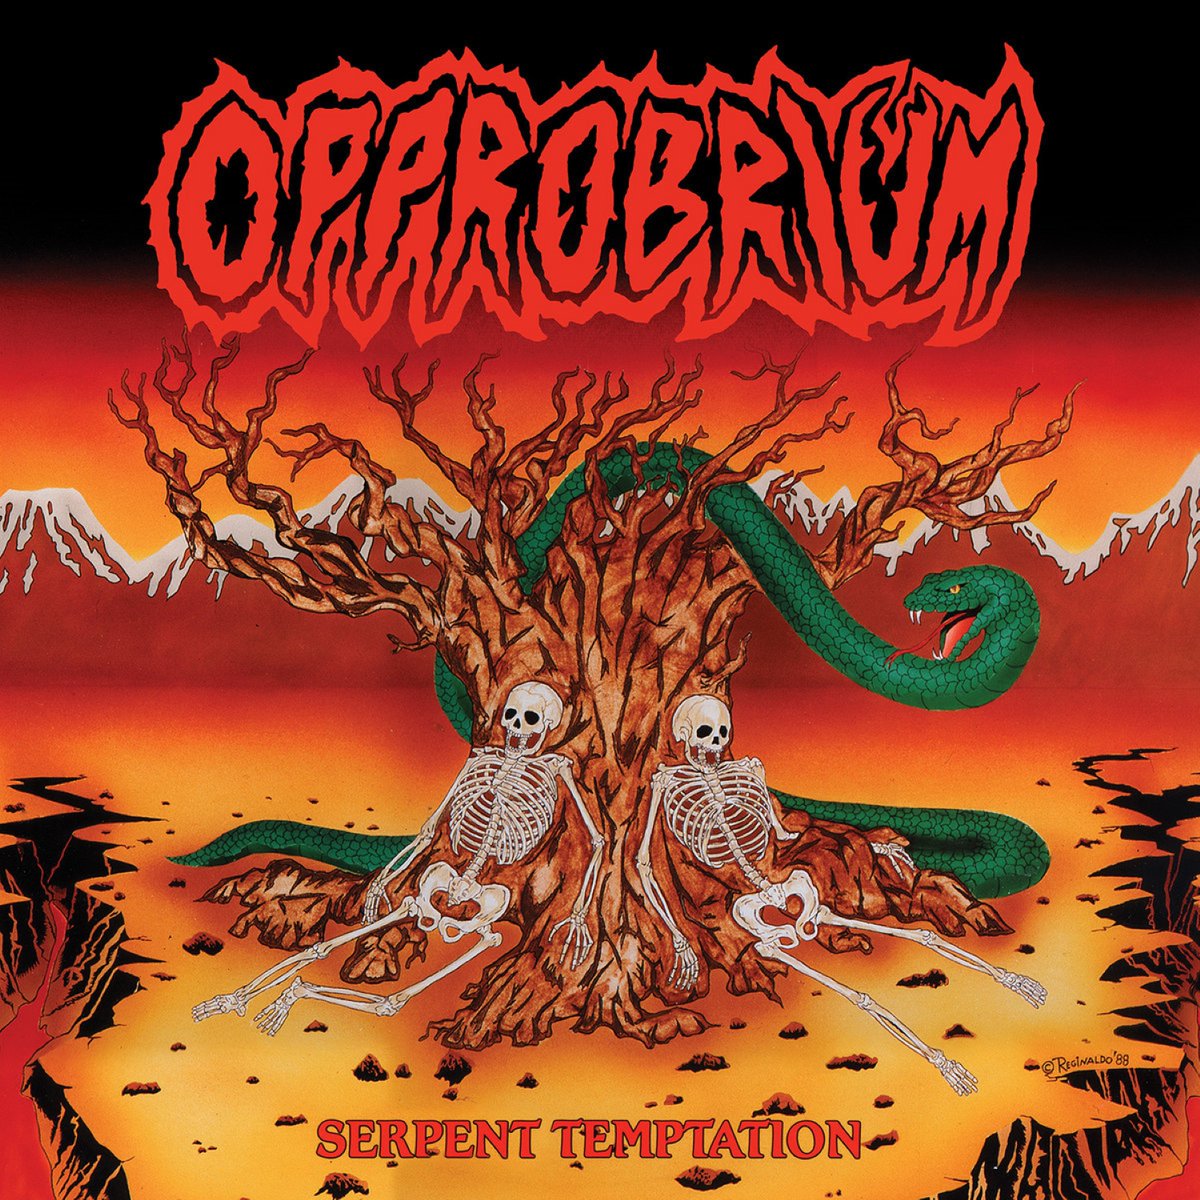 Released on this day! April 14th, 1988: #Opprobrium released their classic debut album #SerpentTemptation (originally released under former band name Incubus). What is your favorite song from the record?

#deathmetal #thrashmetal #osdm #metal #nolametal